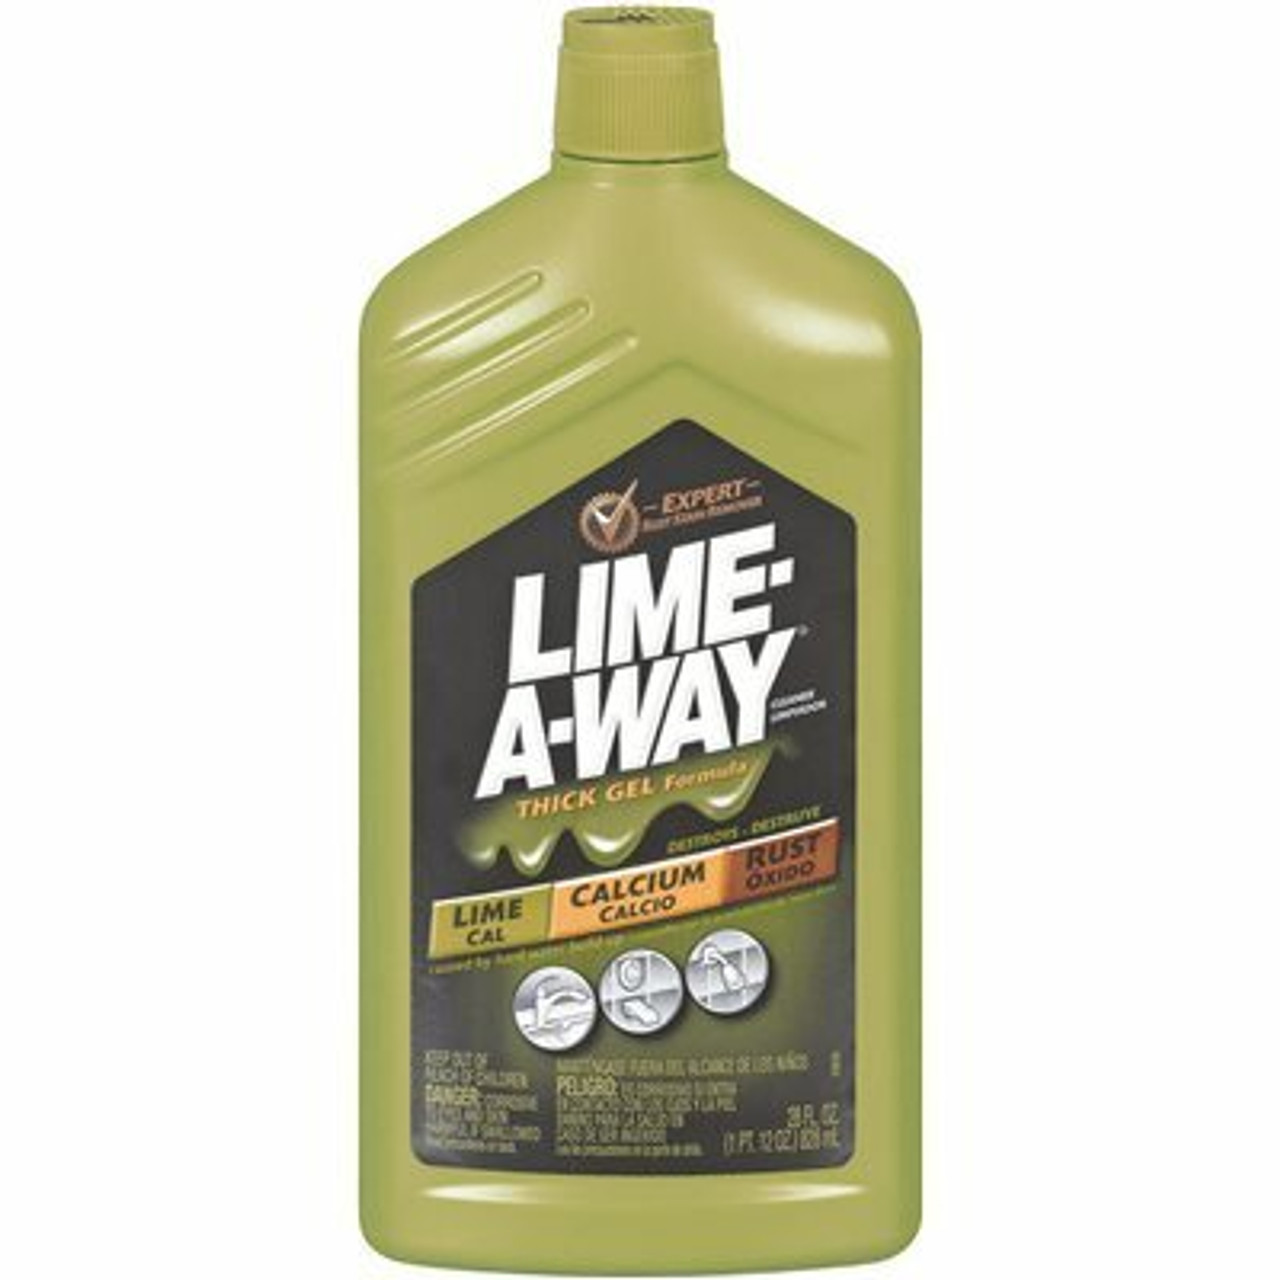 Lime-A-Way 28 Oz. Lime-A-Way Toggle Mineral Deposit Remover